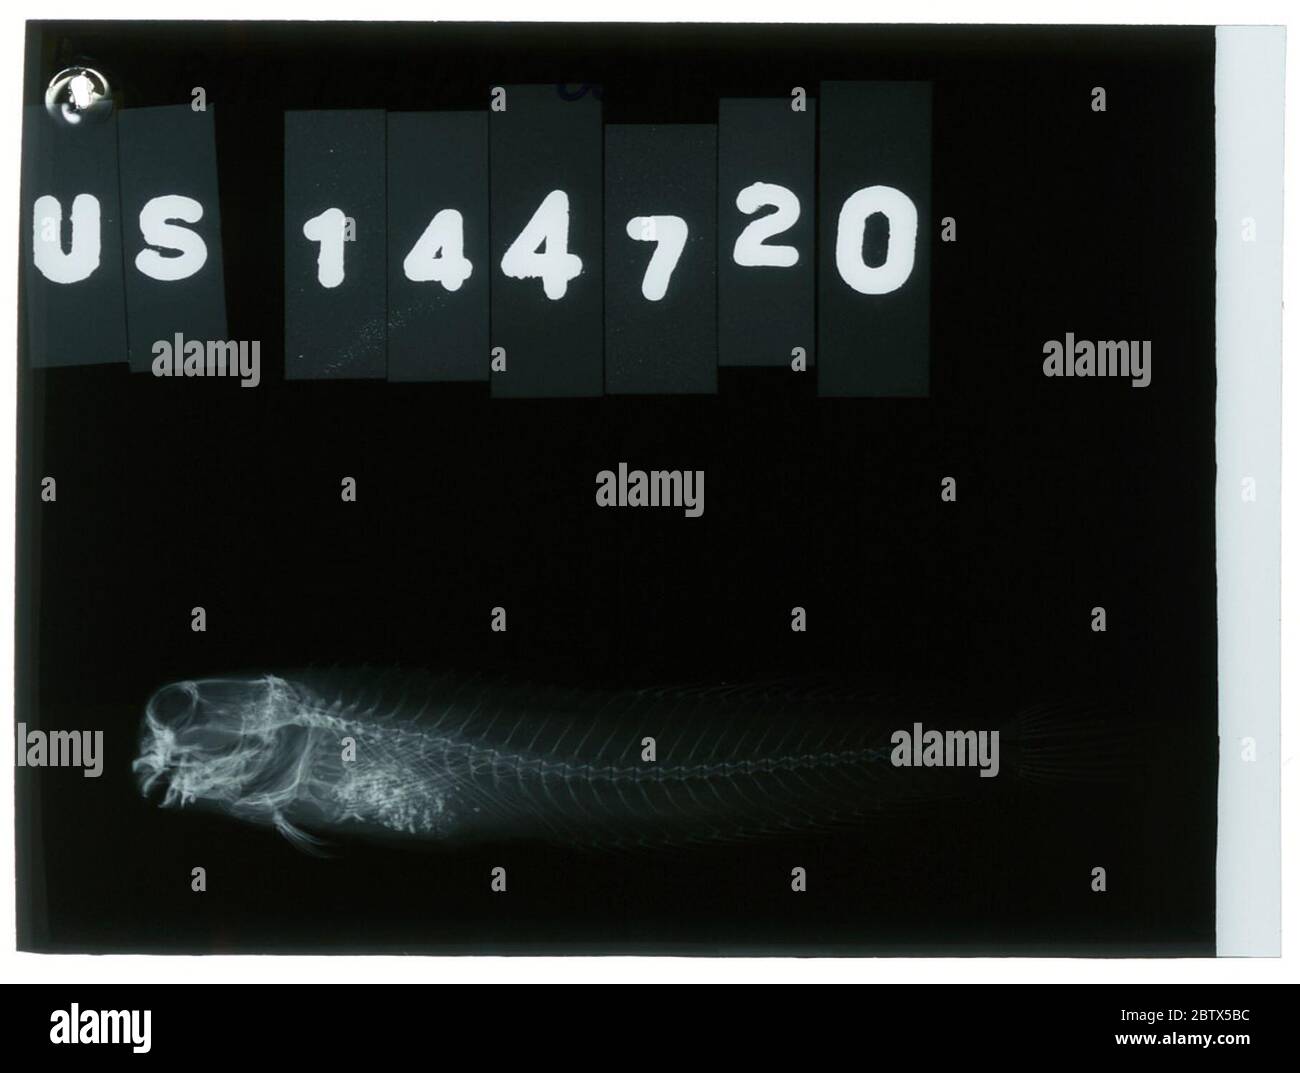 Entomacrodus plurifilis plurifilis Schultz Chapman. Radiograph is of a holotype; The Smithsonian NMNH Division of Fishes uses the convention of maintaining the original species name for type specimens designated at the time of description. The currently accepted name for this species is Entomacrodus striatus.24 Oct 20181 Stock Photo